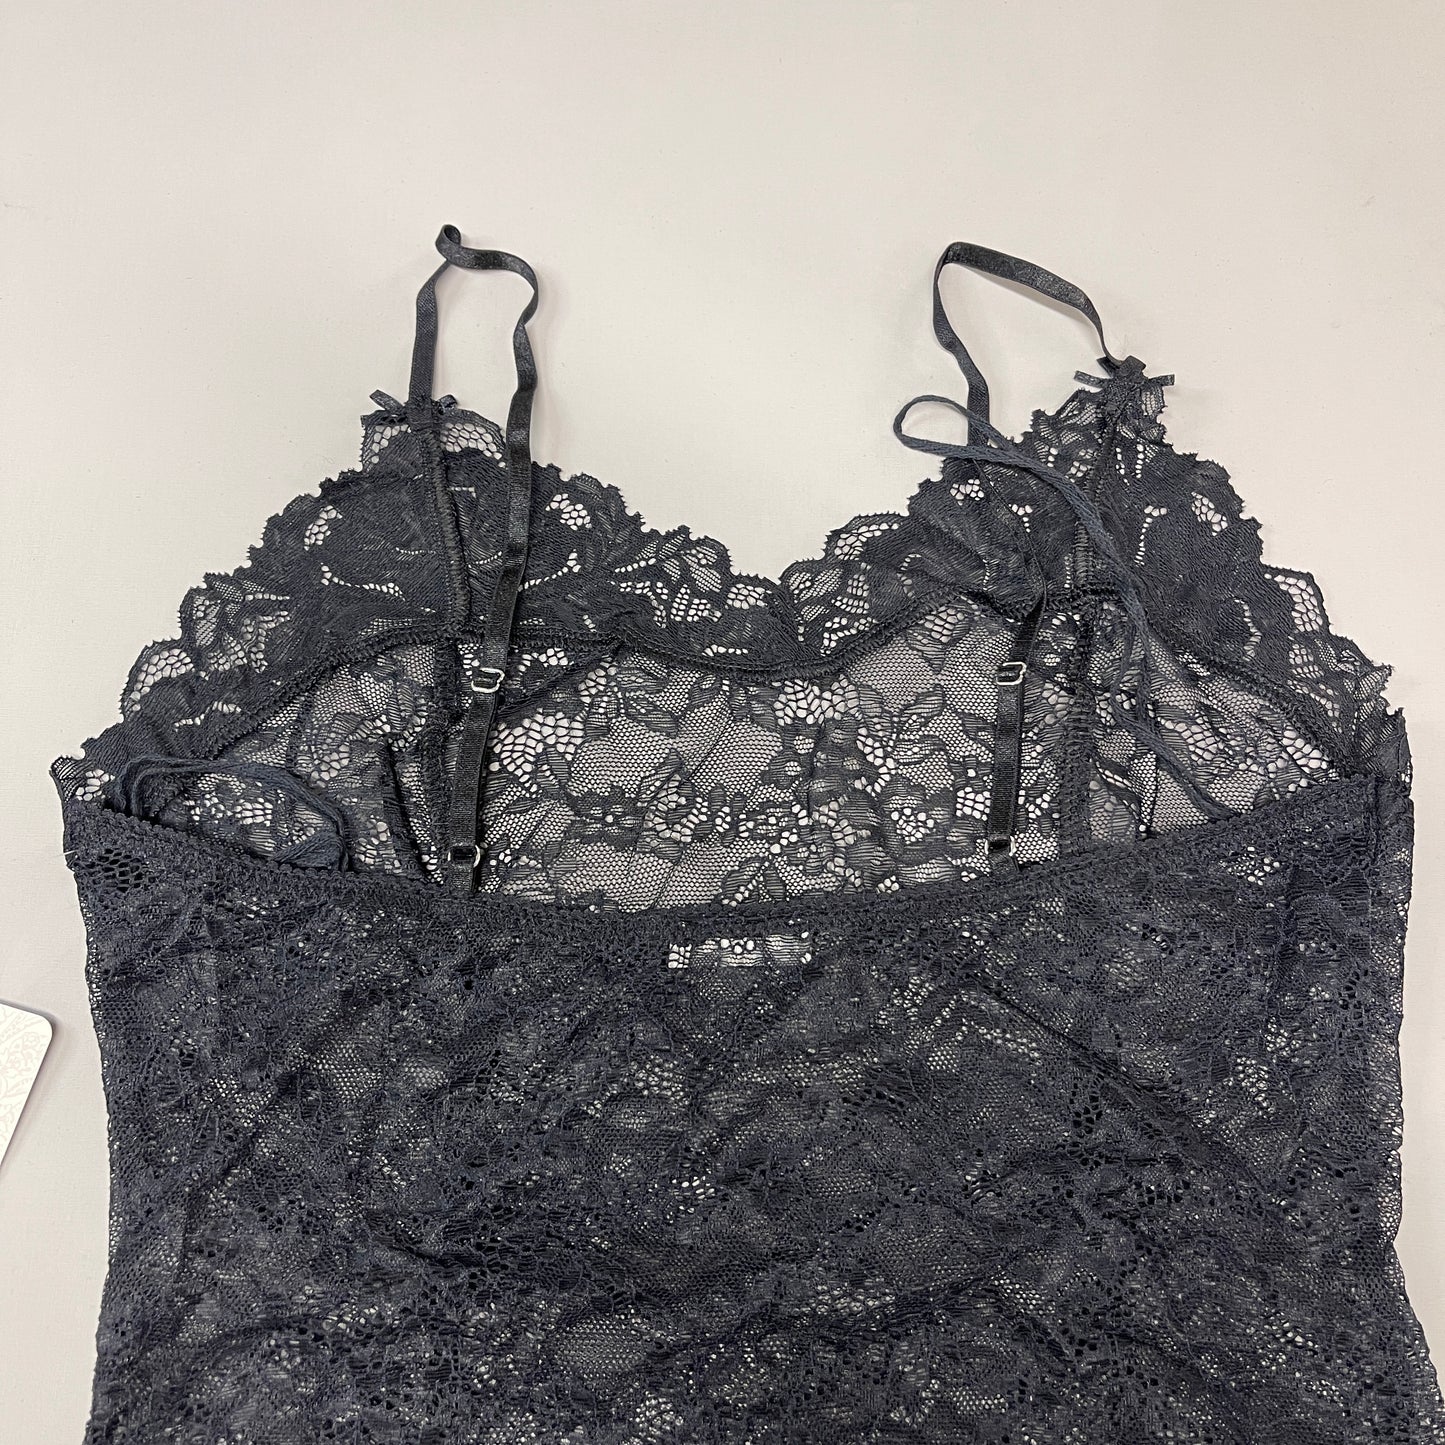 FREE PEOPLE Sheer One Touch Bodysuit Leotard Women's Sz XS Black Lace OB1457989 (New)